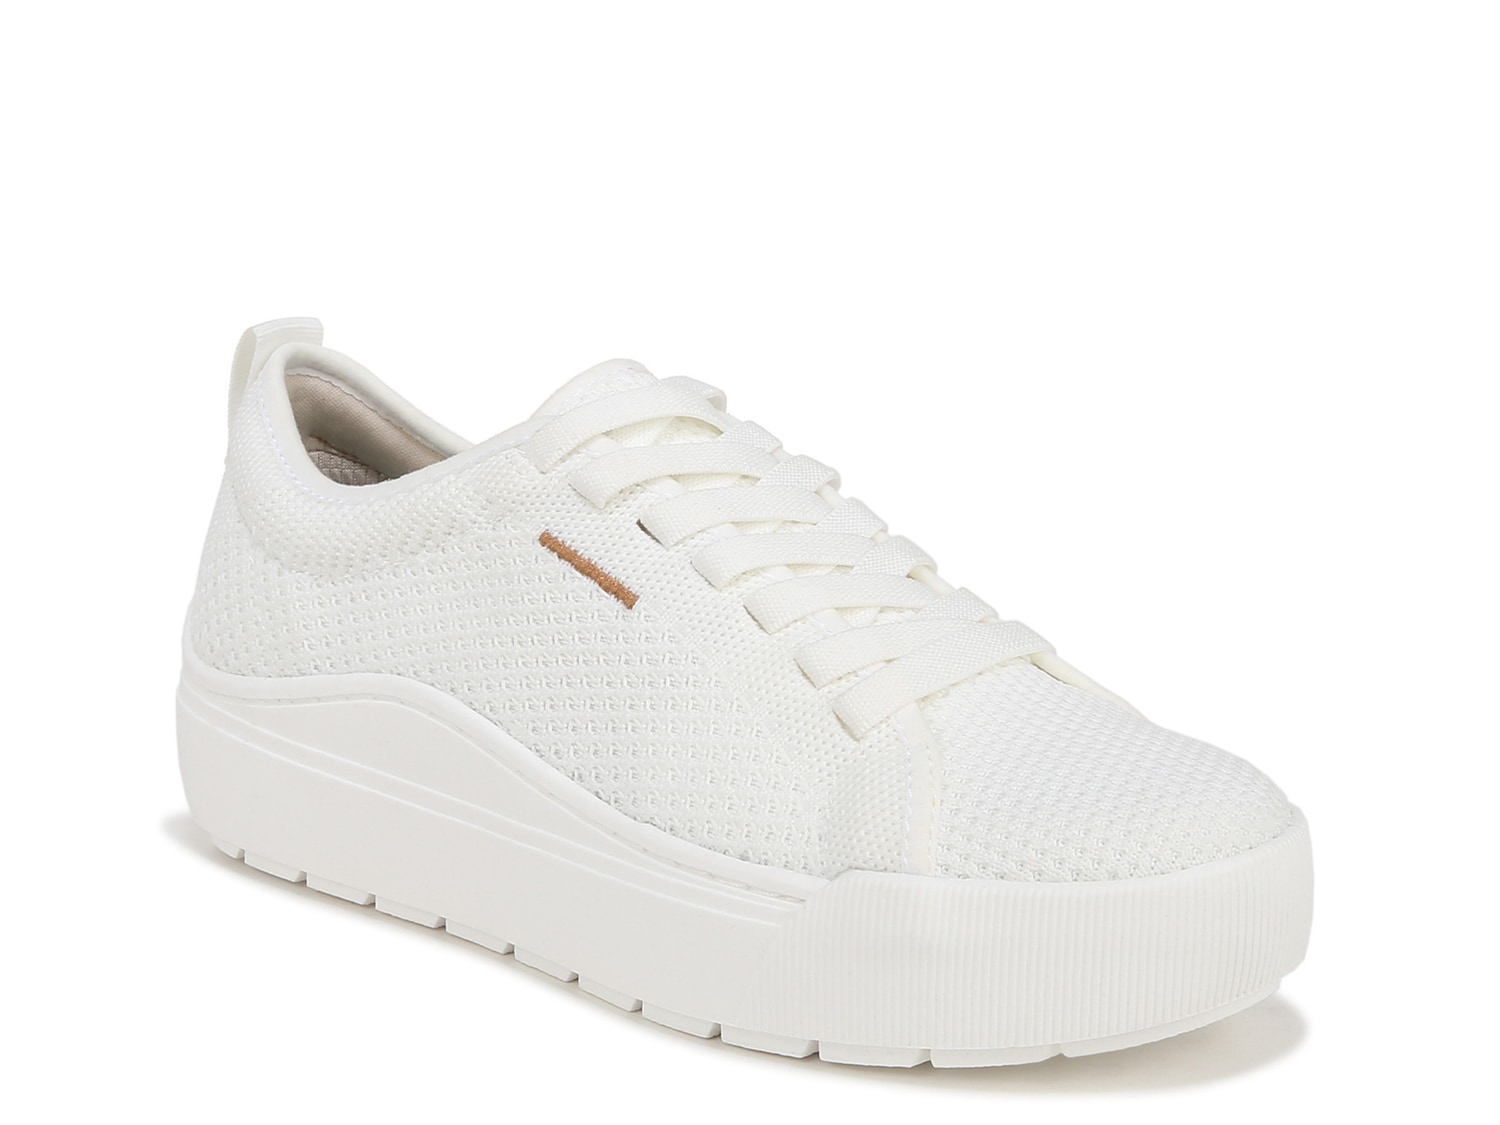 Dr. Scholl's Time Off Knit Platform Slip-On Sneaker - Free Shipping